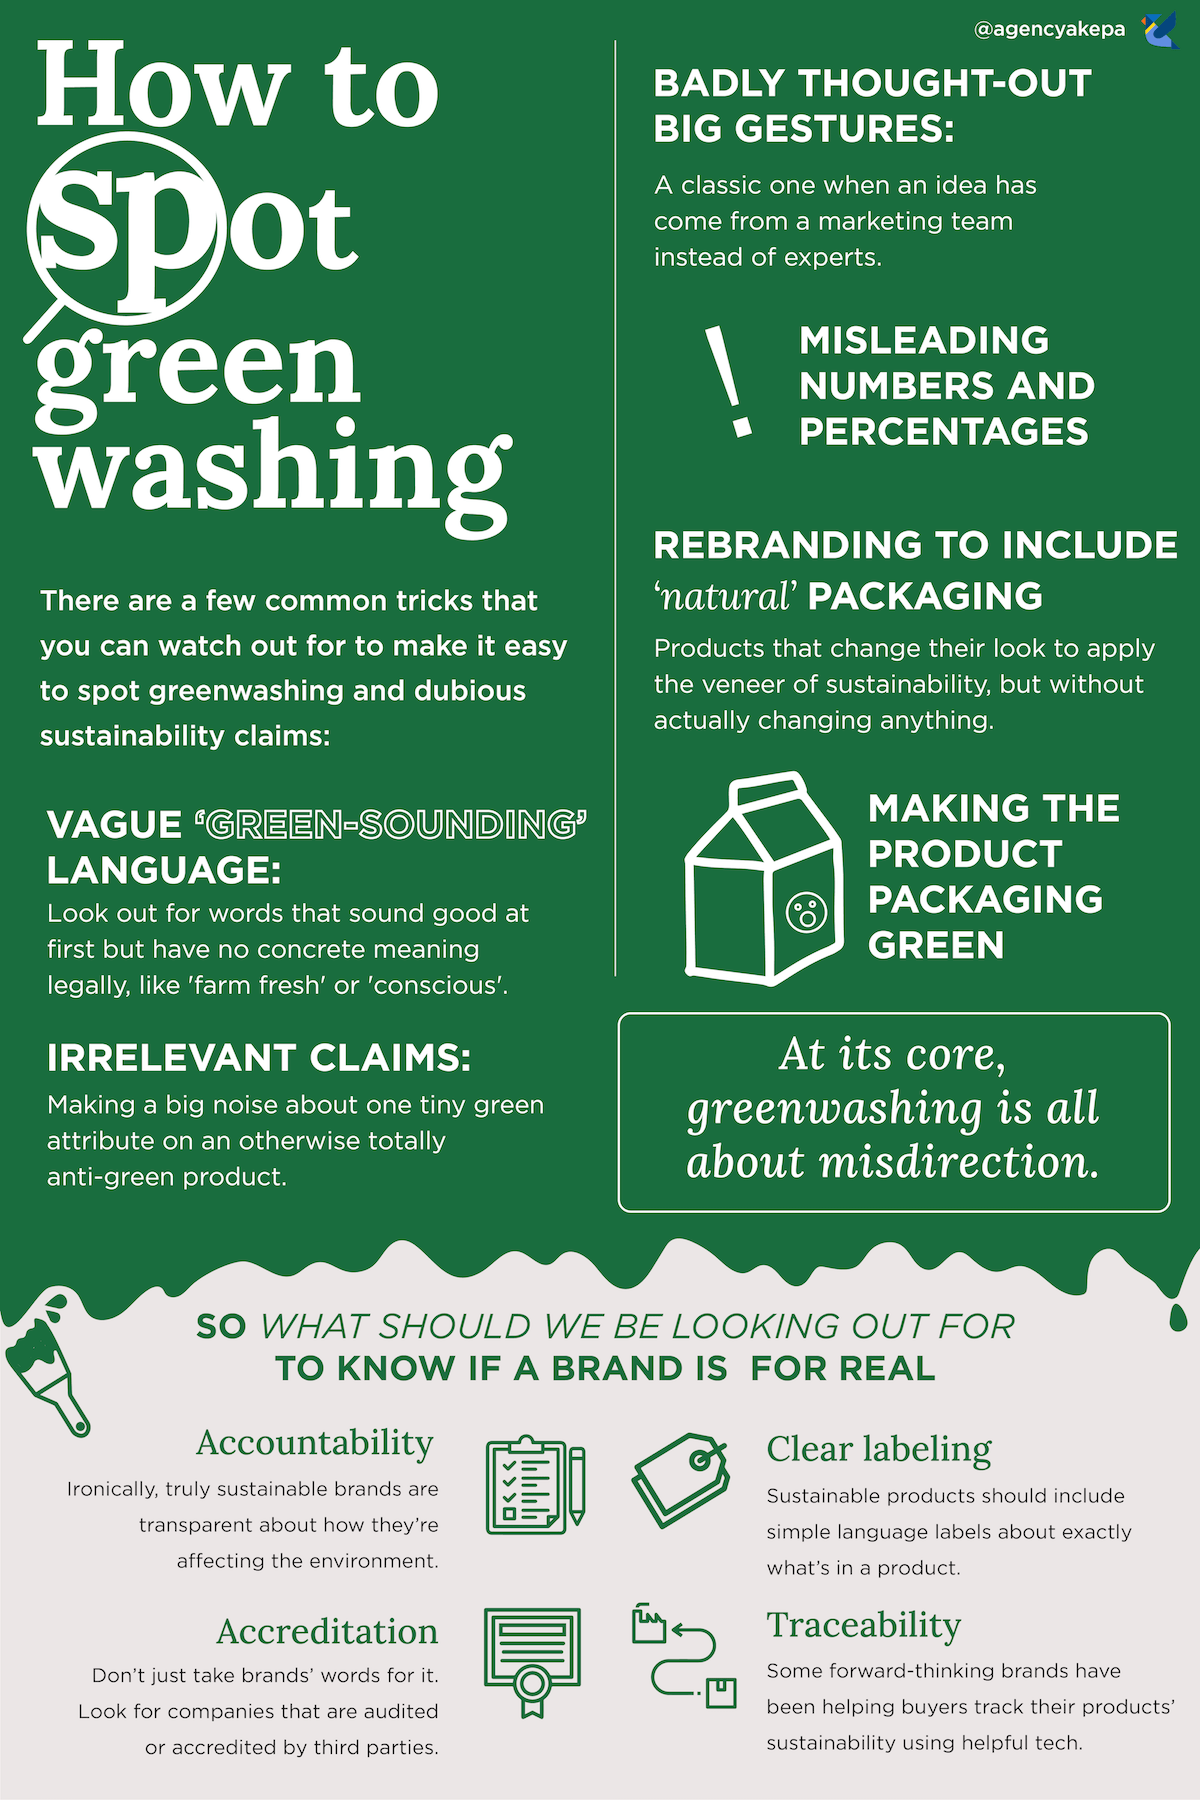 How to spot greenwashing - infographic-min